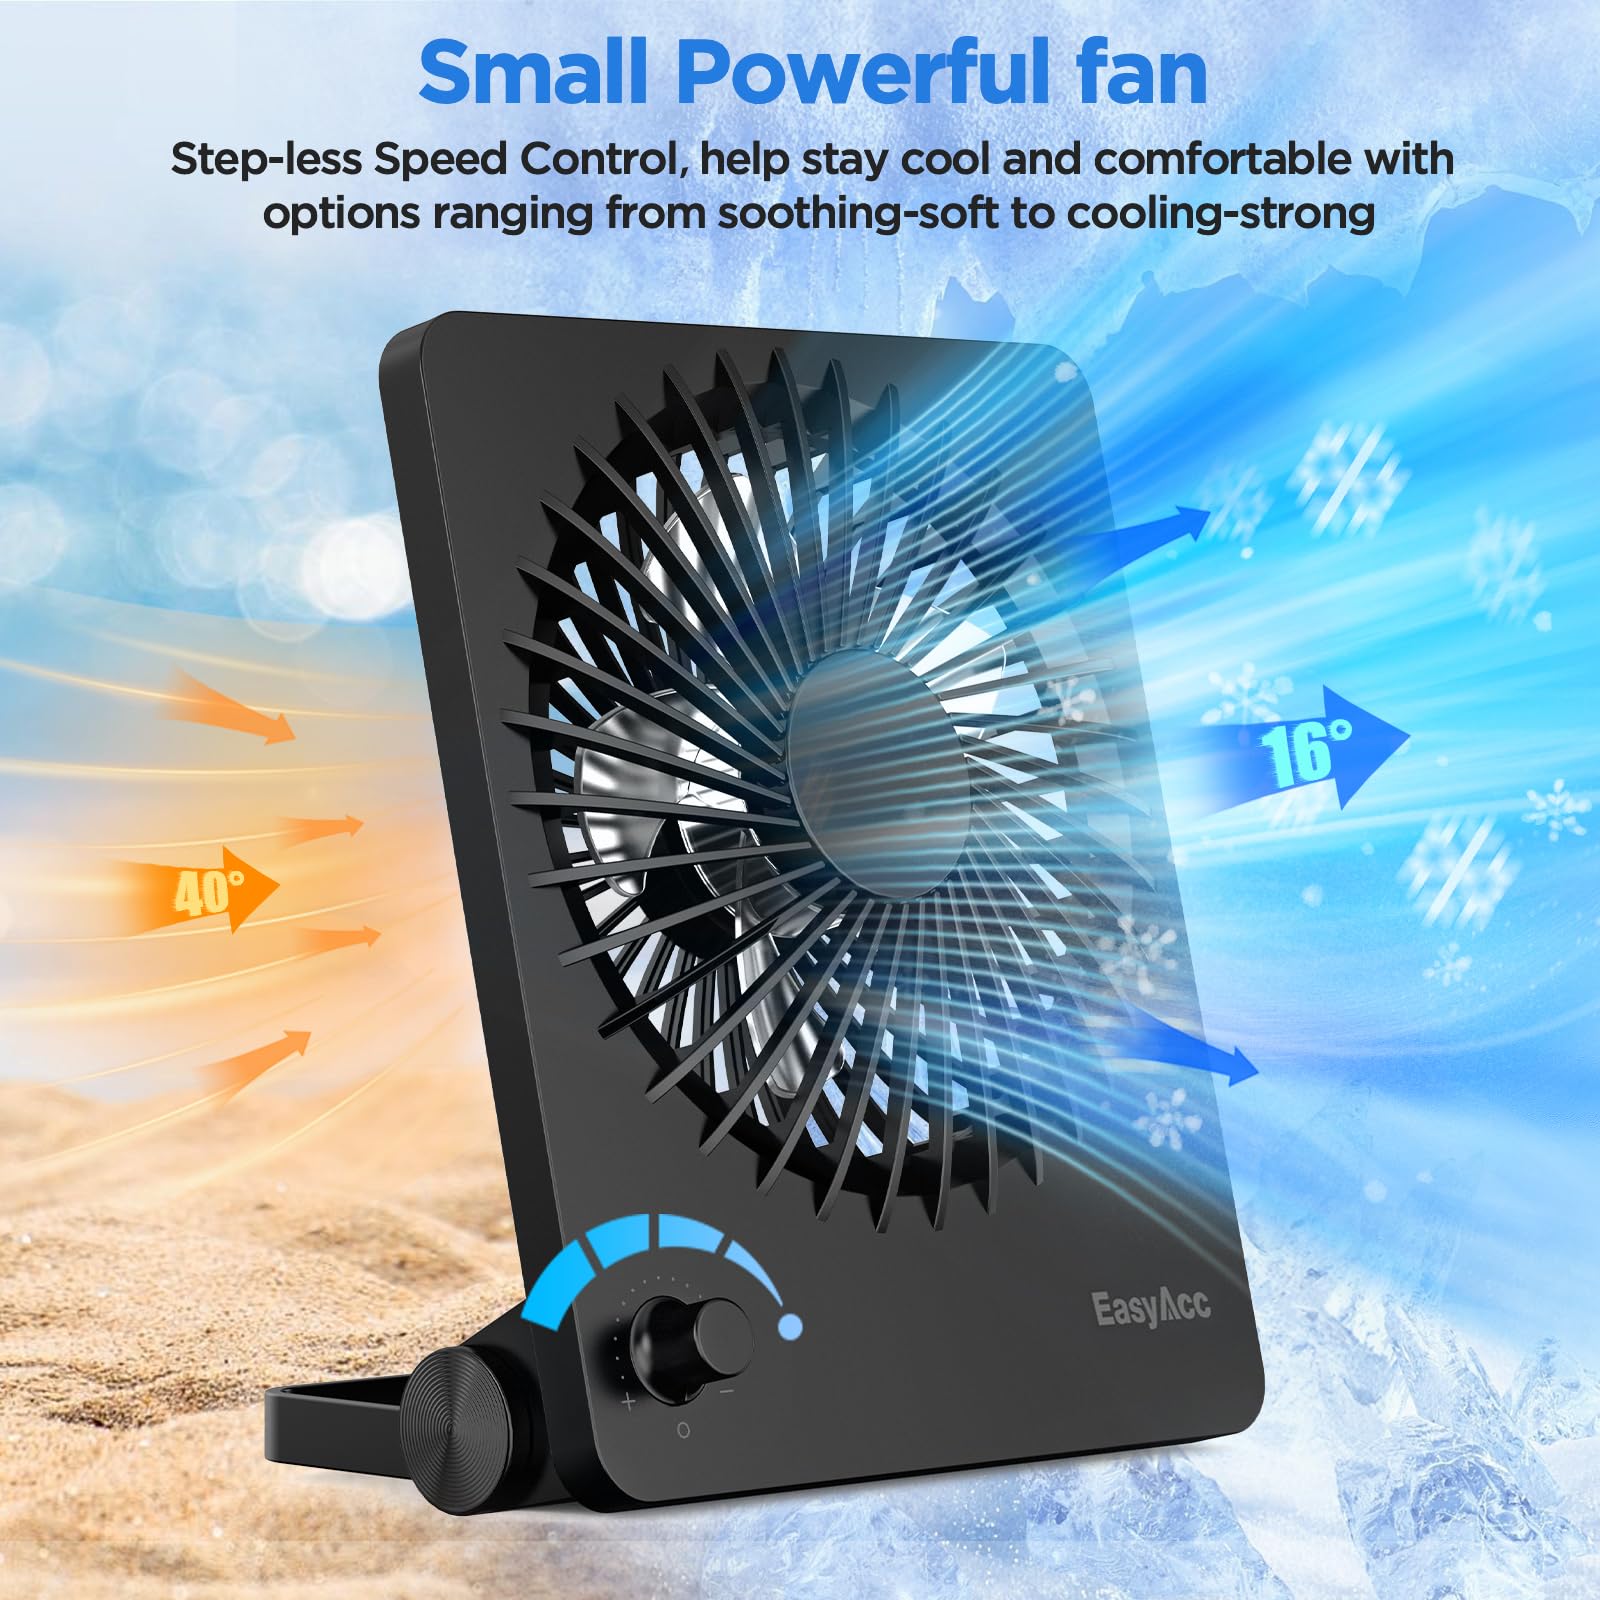 EasyAcc Powerful Desk Fan, 6000 Battery [Max 10-26H Working Time] Rechargeable Portable Personal Travel Fan with Step-less Speed Control, Quiet Fan for Travel Office Home Cruise Sporting Events